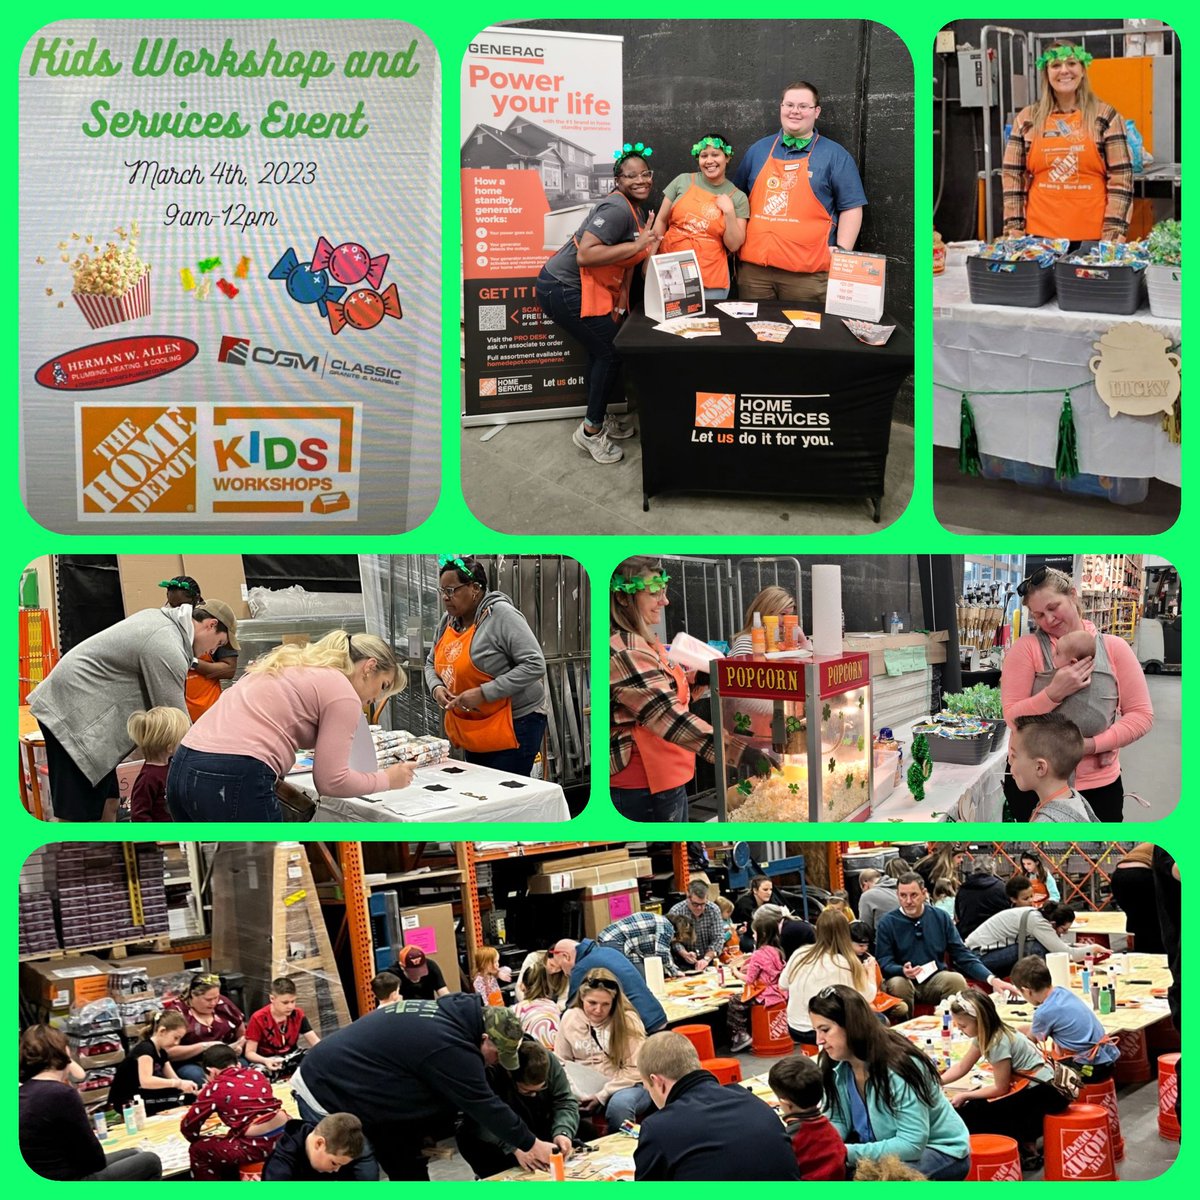 Golden Leads 💰 to Fill the Pipeline Pot, for our Kids Workshop & Lead Event. How lucky ☘️ are we to have Jeremy from Herman Allen & Robbie from Classic Granite to drive leads today too! #OneTeamOneFight @HillaryHyatt @kmn293 @THDHynes